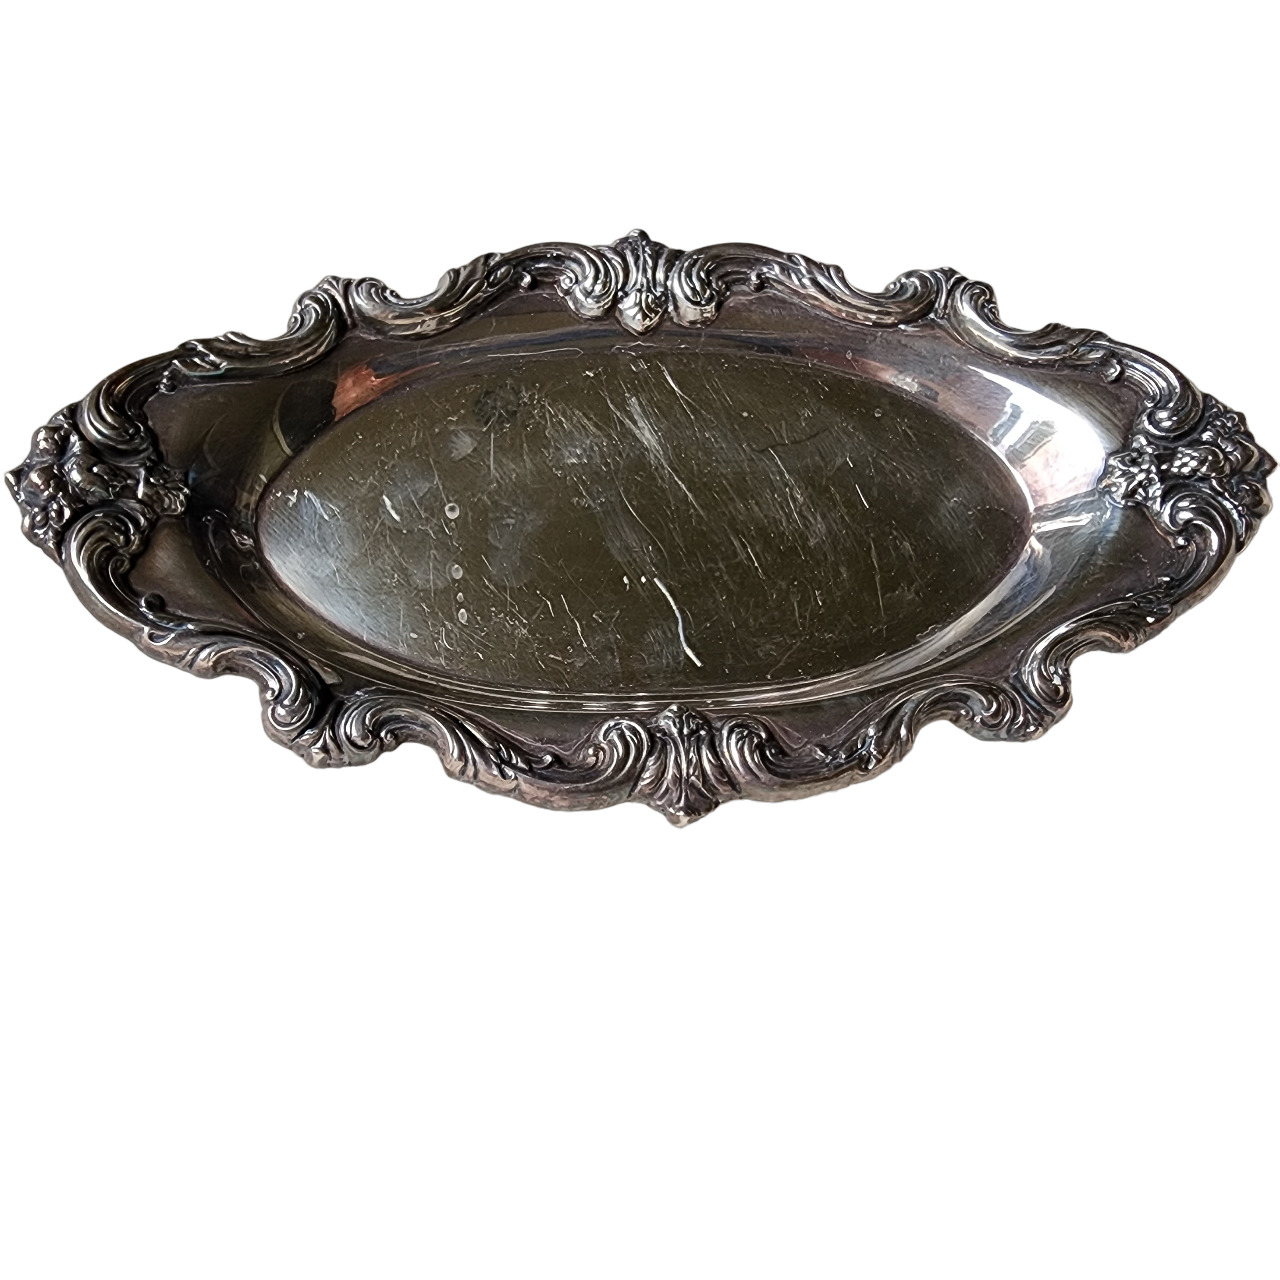 Vintage Victorian Style Silver Plate Tray Oval Serving Dish E.G. Webster & Son